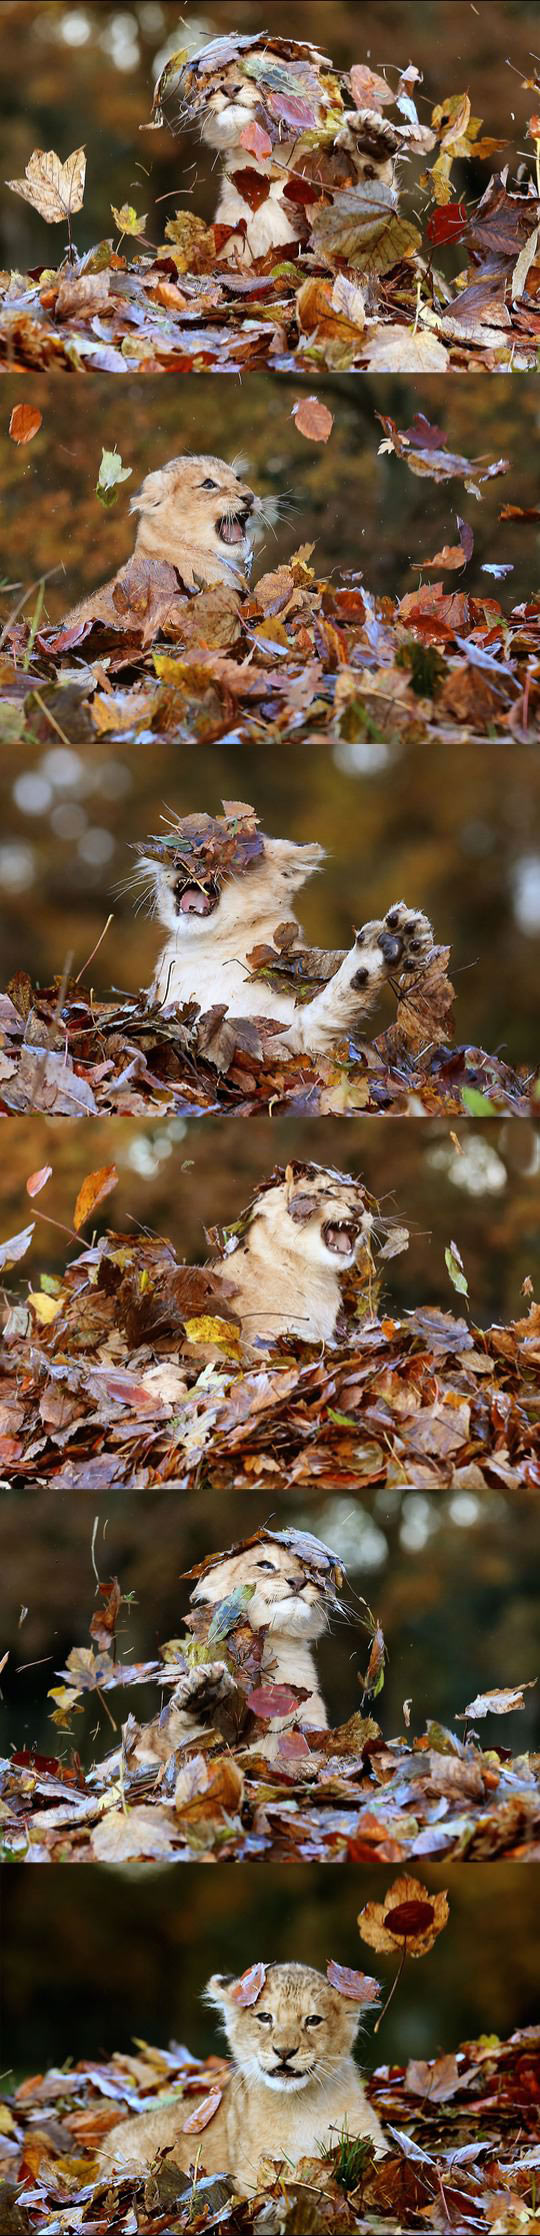 Just A Kitty Playing In The Leaves